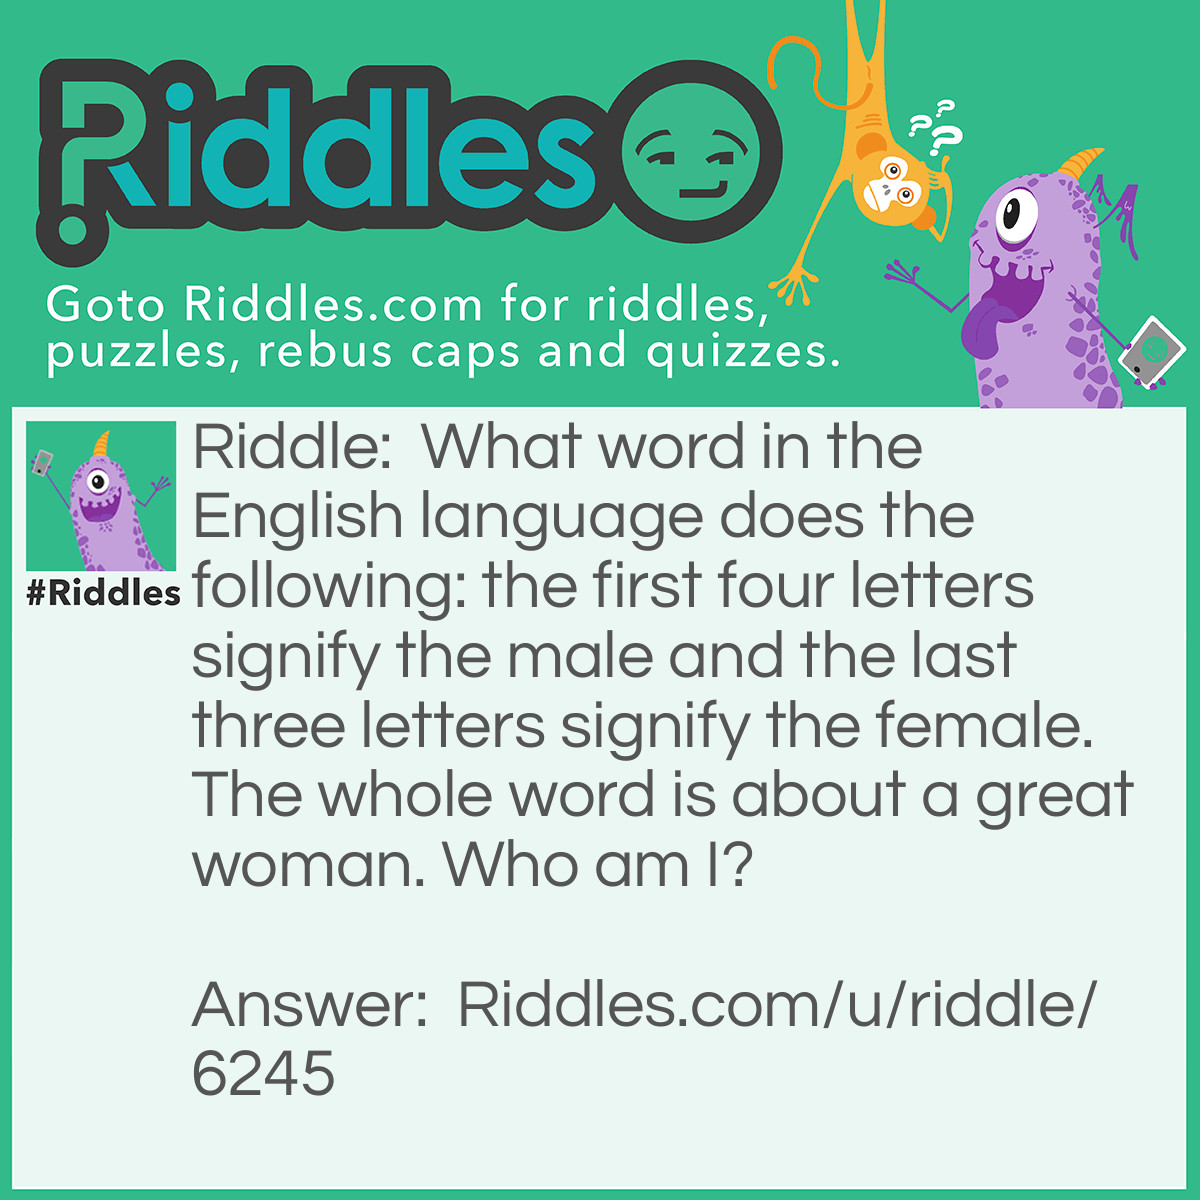 Riddle: What word in the English language does the following: the first four letters signify the male and the last three letters signify the female. The whole word is about a great woman. Who am I? Answer: Heroine.